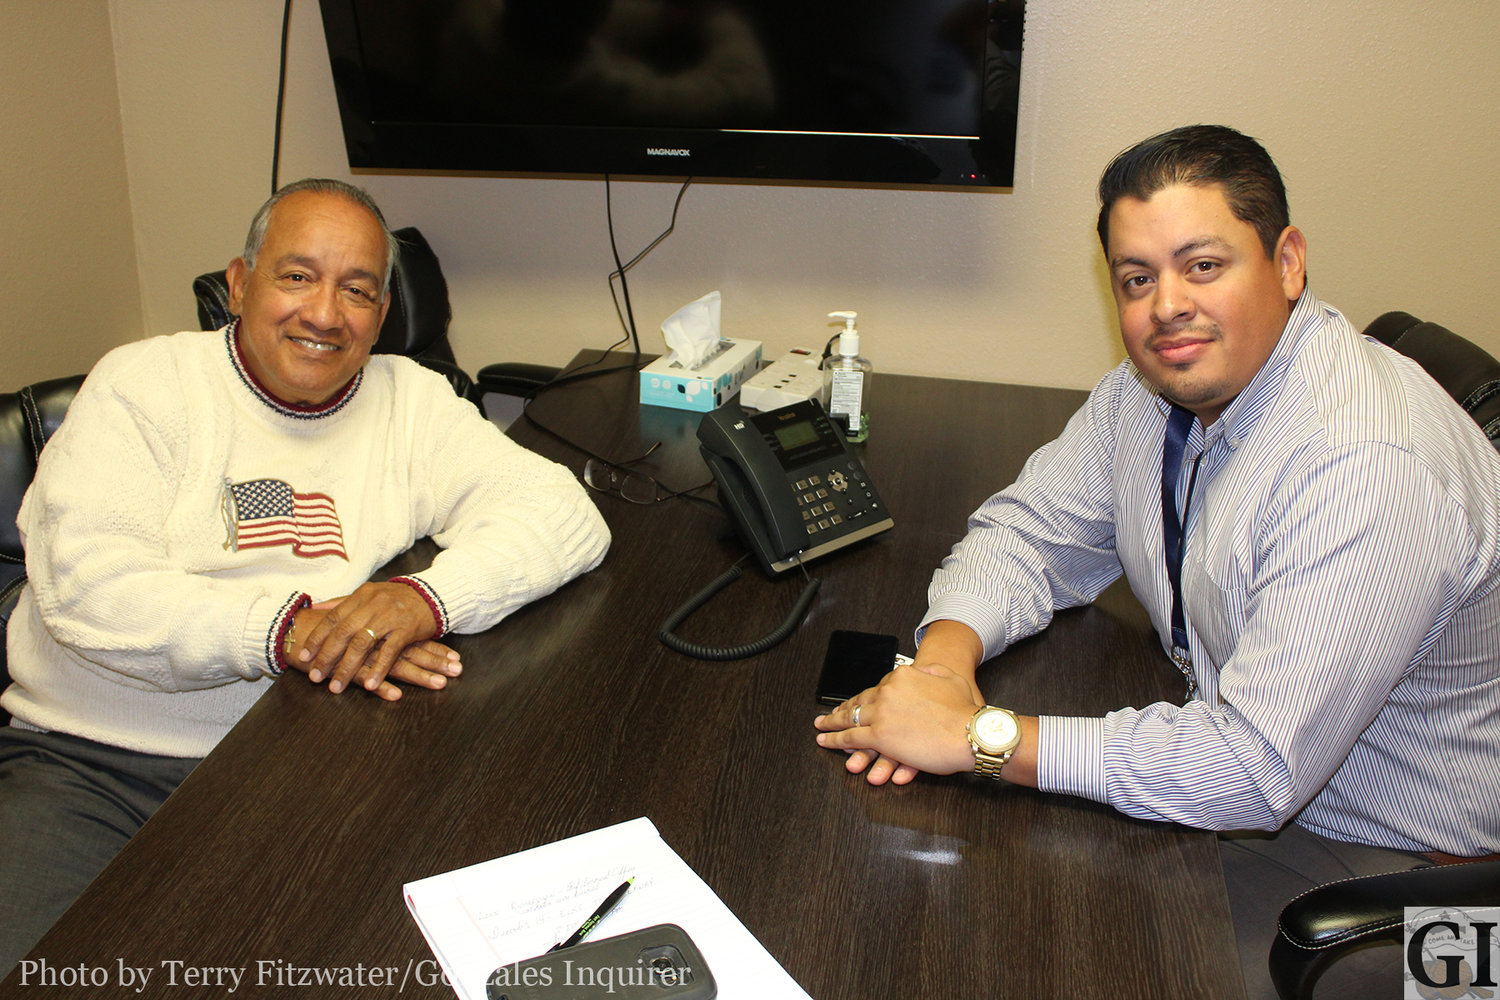 For the past 11 years, Henry Salas (left) has served as the CEO of the Community Health Centers of South Central Texas (CHCSCT). When he retires this week, Rafael De La Paz (right) will replace him.